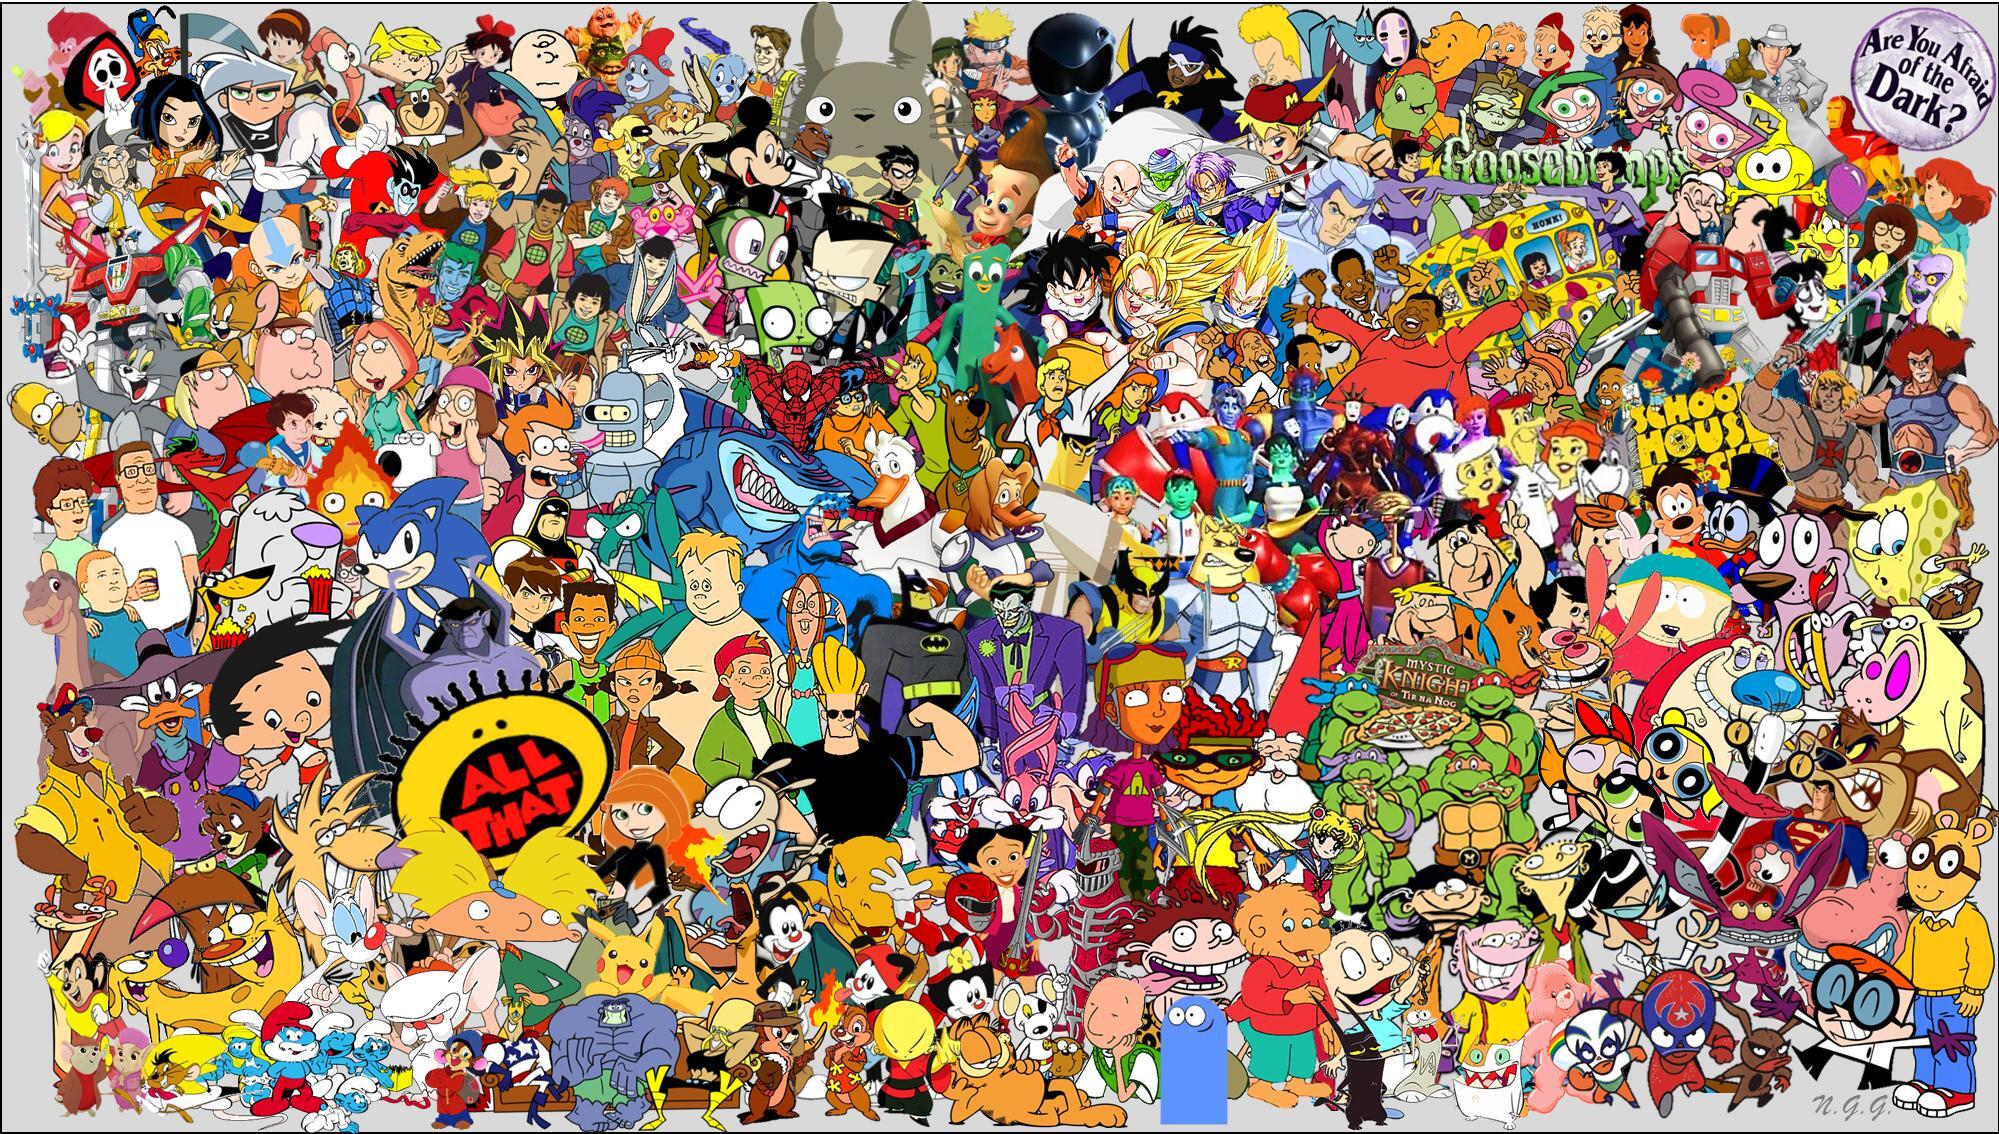 Cartoon characters of the 2000s - Animated series, Cartoons, Animation, Characters (edit), Pixel Art, Nostalgia